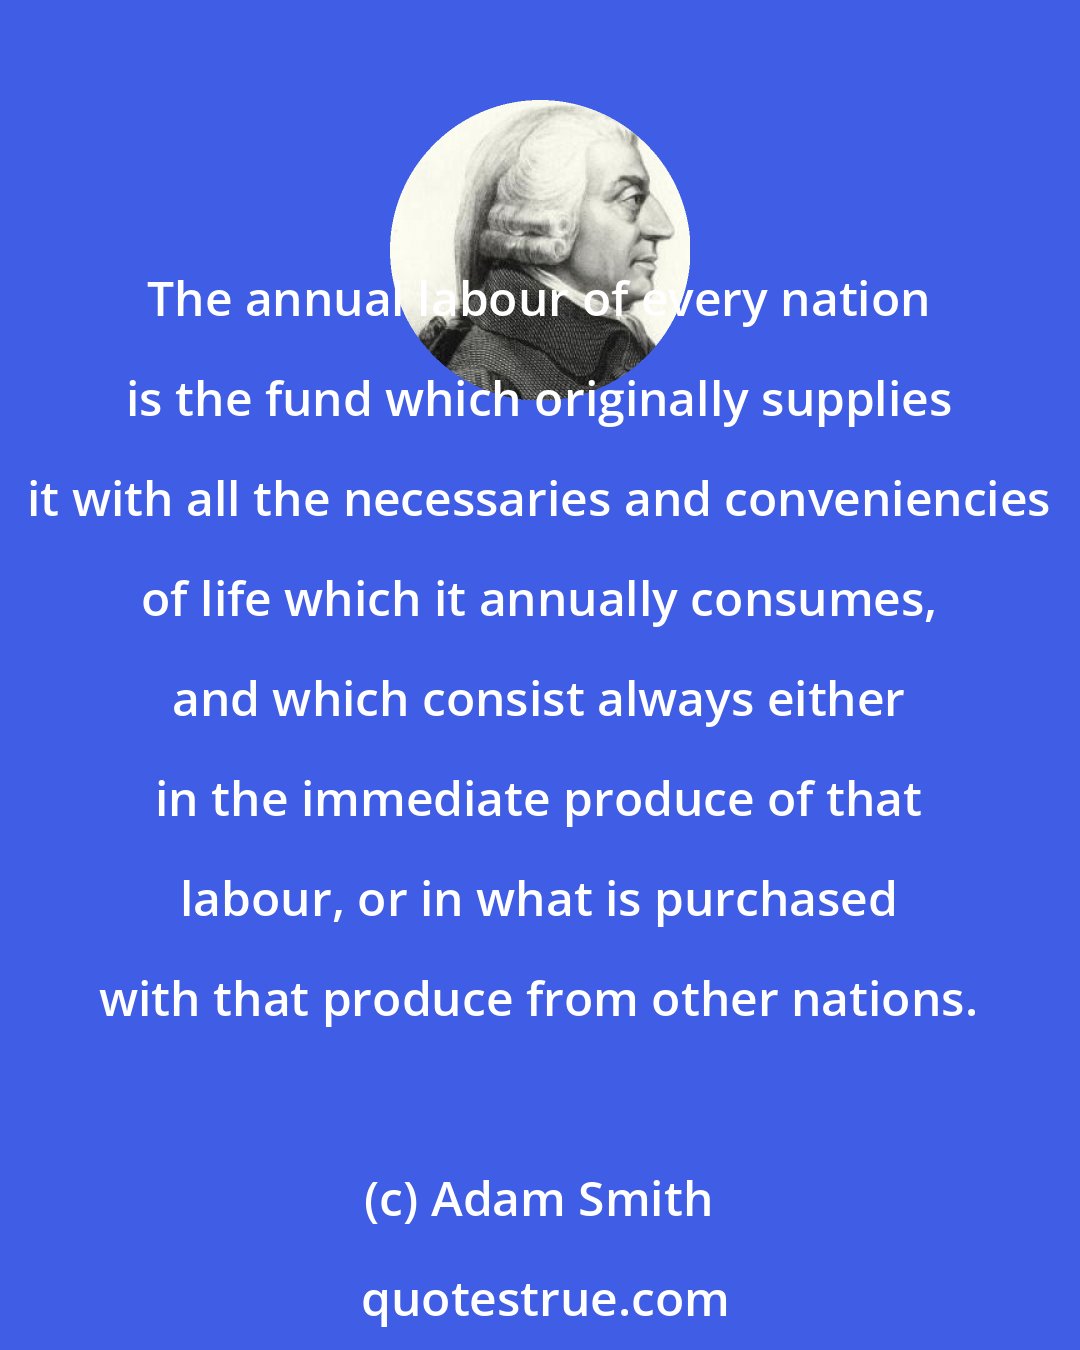 Adam Smith: The annual labour of every nation is the fund which originally supplies it with all the necessaries and conveniencies of life which it annually consumes, and which consist always either in the immediate produce of that labour, or in what is purchased with that produce from other nations.